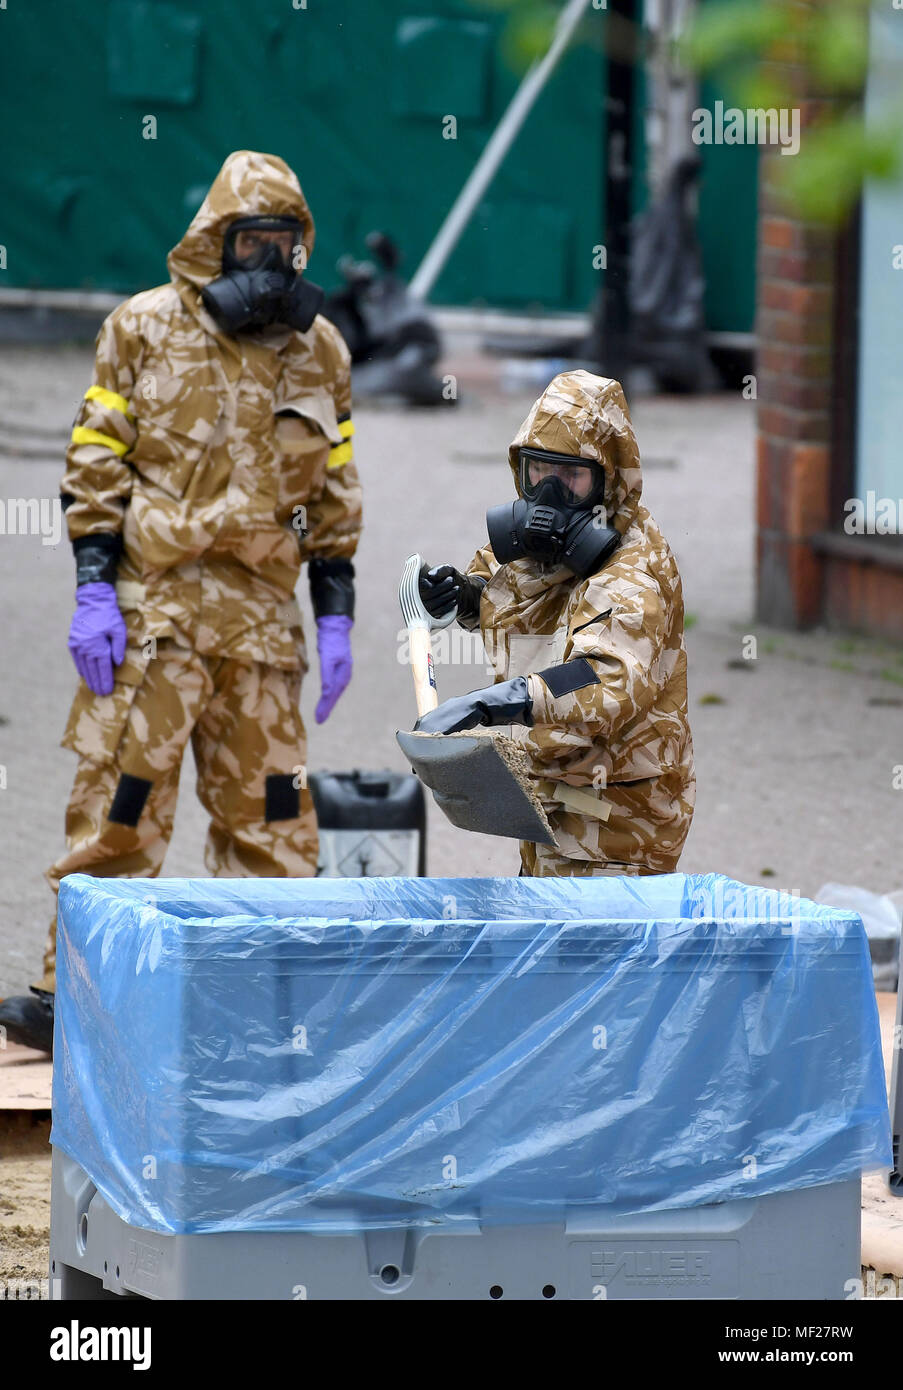 Salisbury, Wiltshire, UK. 24th April, 2018. Soldiers in breathing apparatus replacing the paving where Russian spy Sergei Skripal and his daughter collapsed after their nerve agent attack. Credit: Finnbarr Webster/Alamy Live News Stock Photo